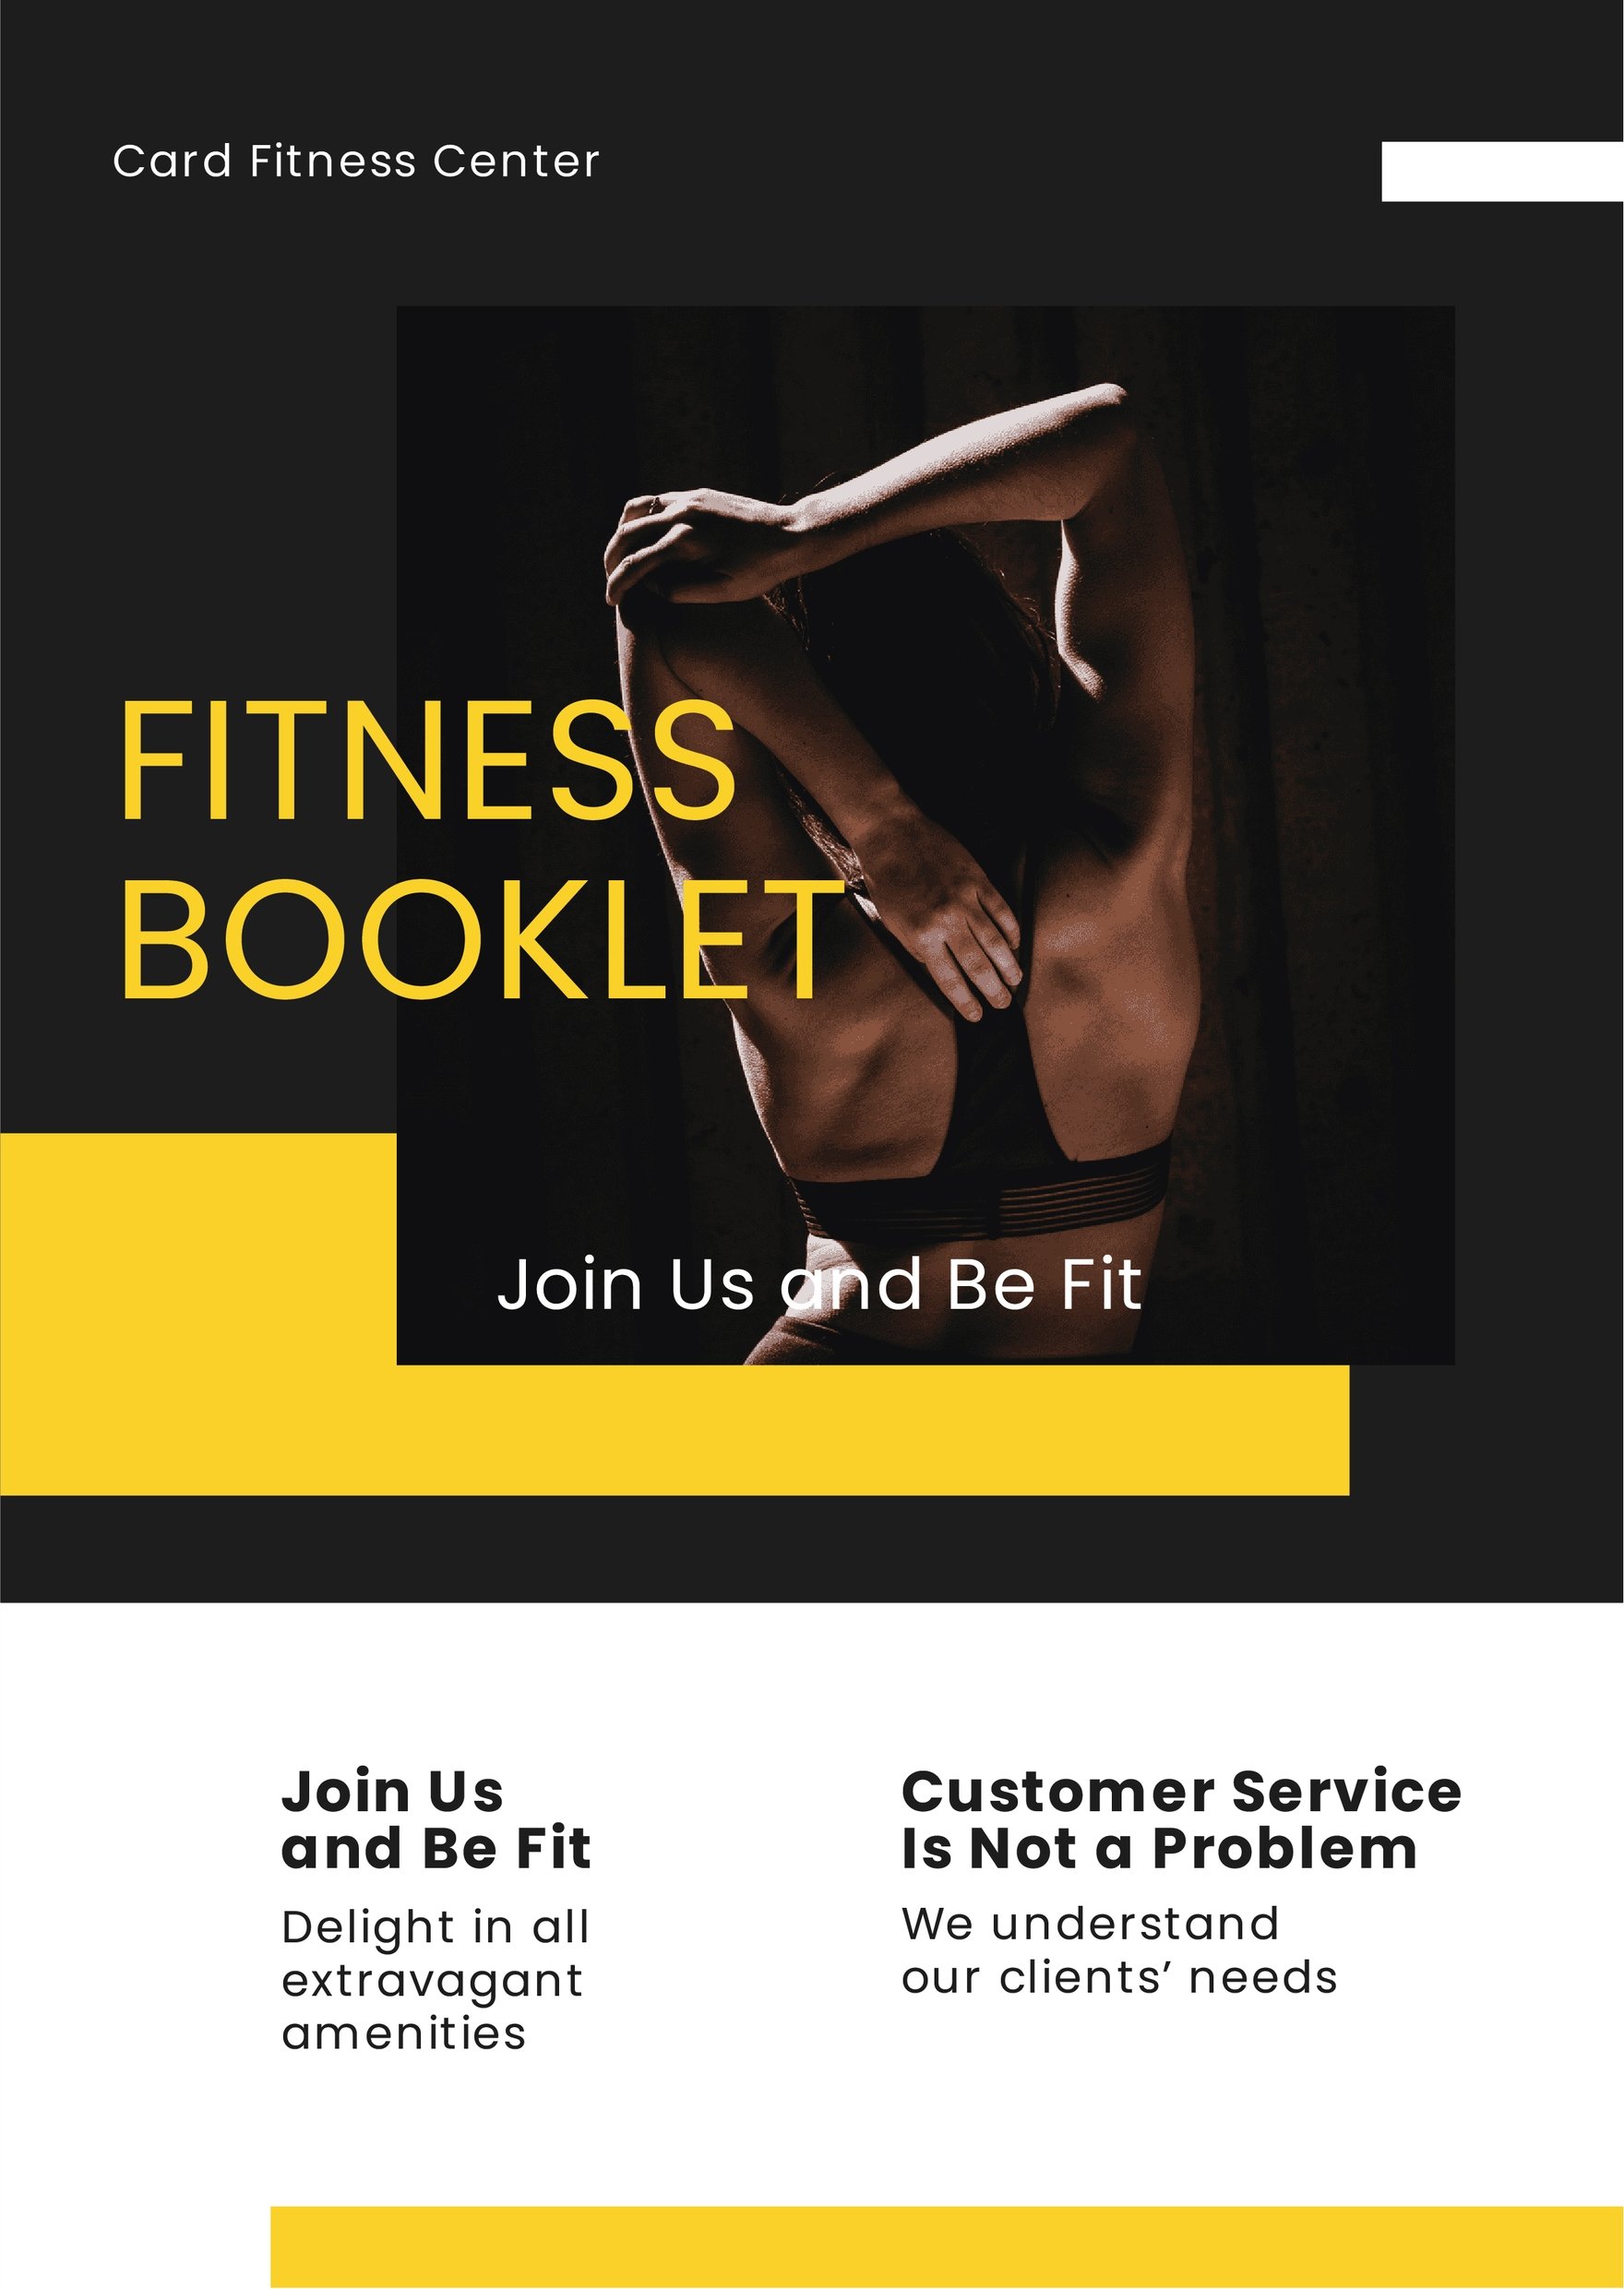 Free Fitness Booklet Template in Word, Google Docs, Illustrator, PSD, Apple Pages, Publisher